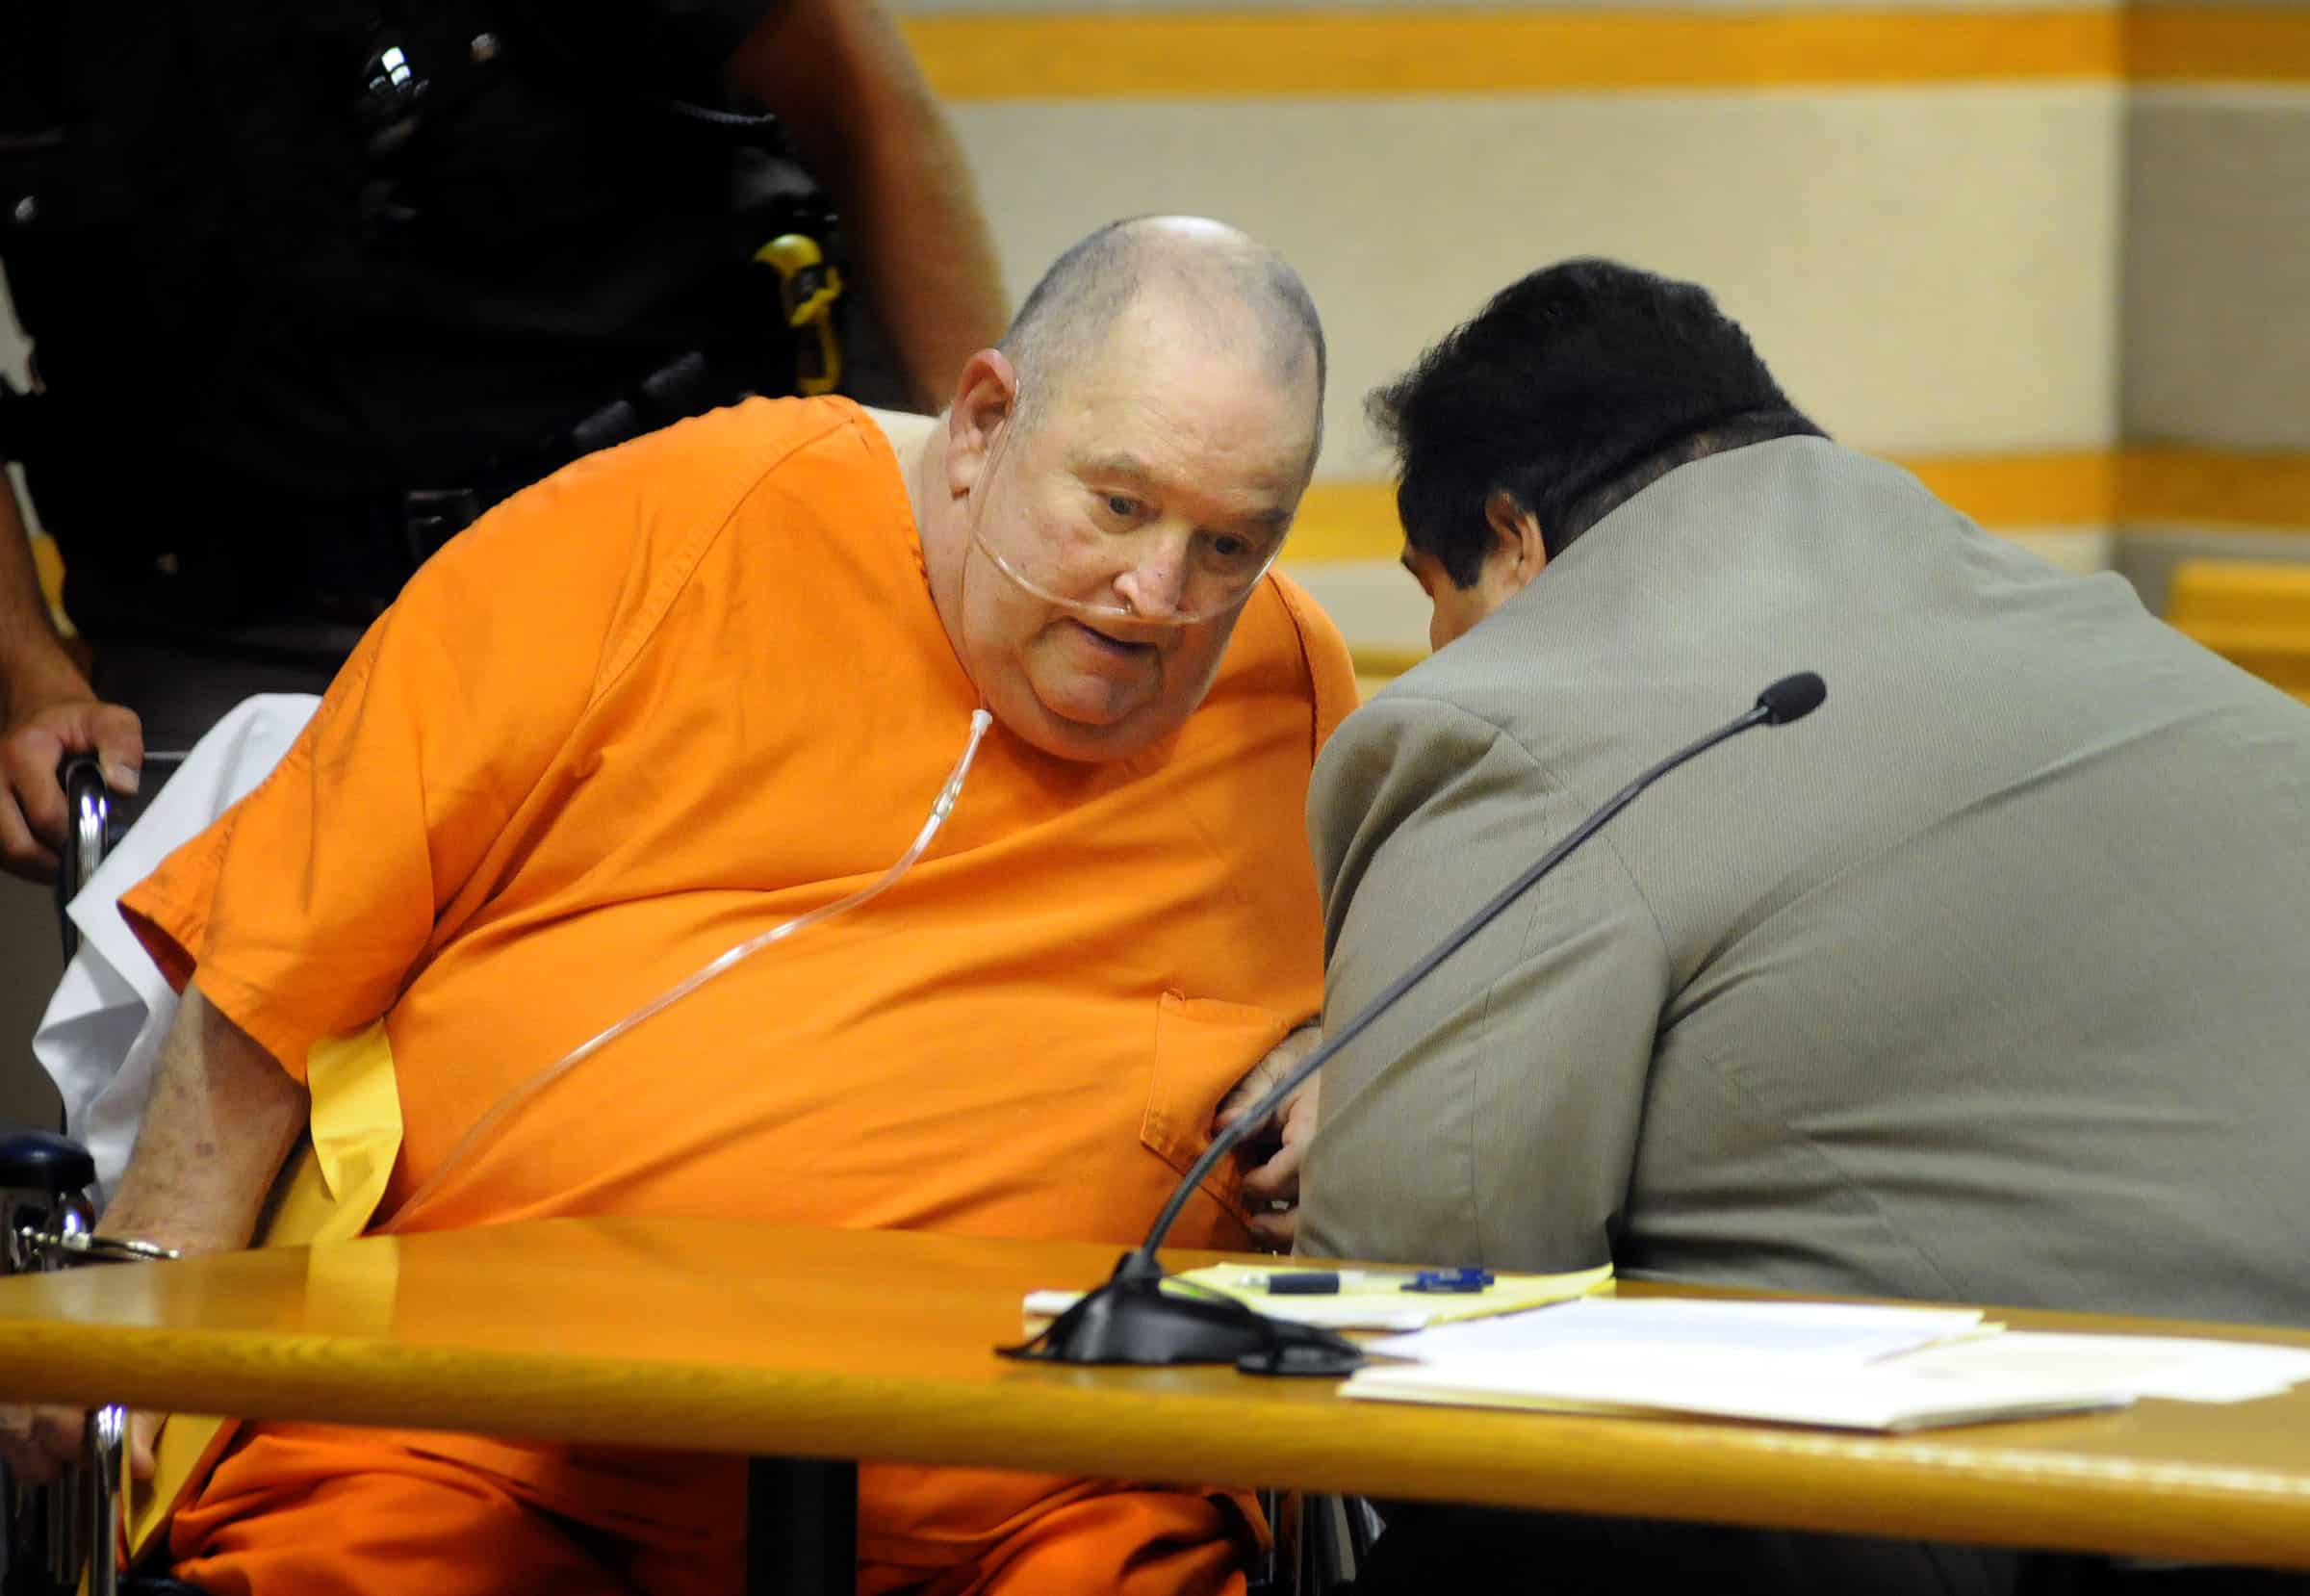 Edward Edwards confers with his lawyer while wearing orange prison attire during his trial